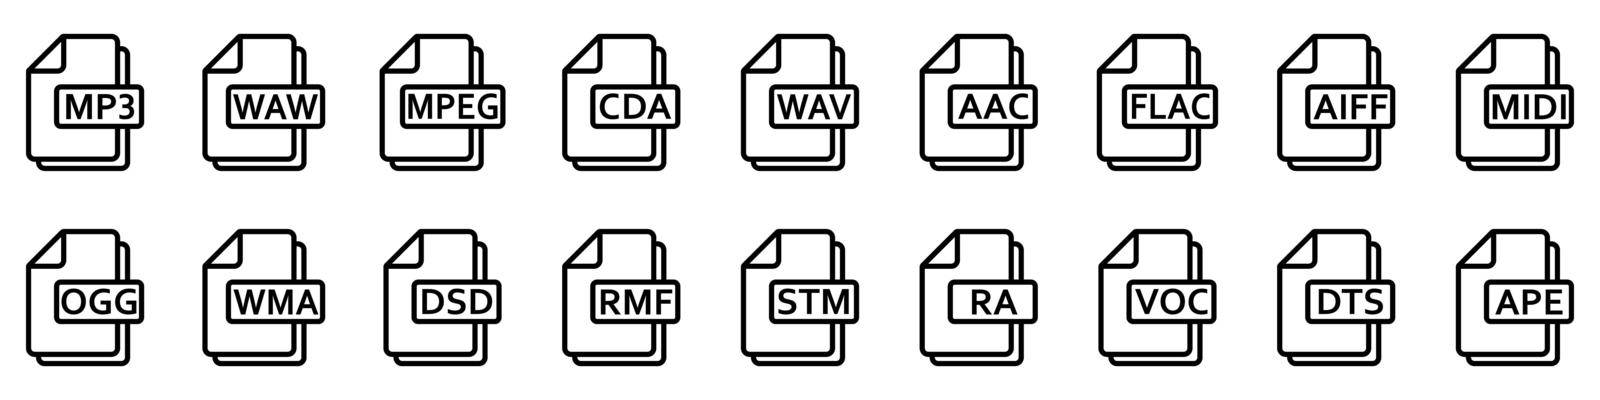 Audio file formats. Vector linear icons. Audio file icons. by Chekman